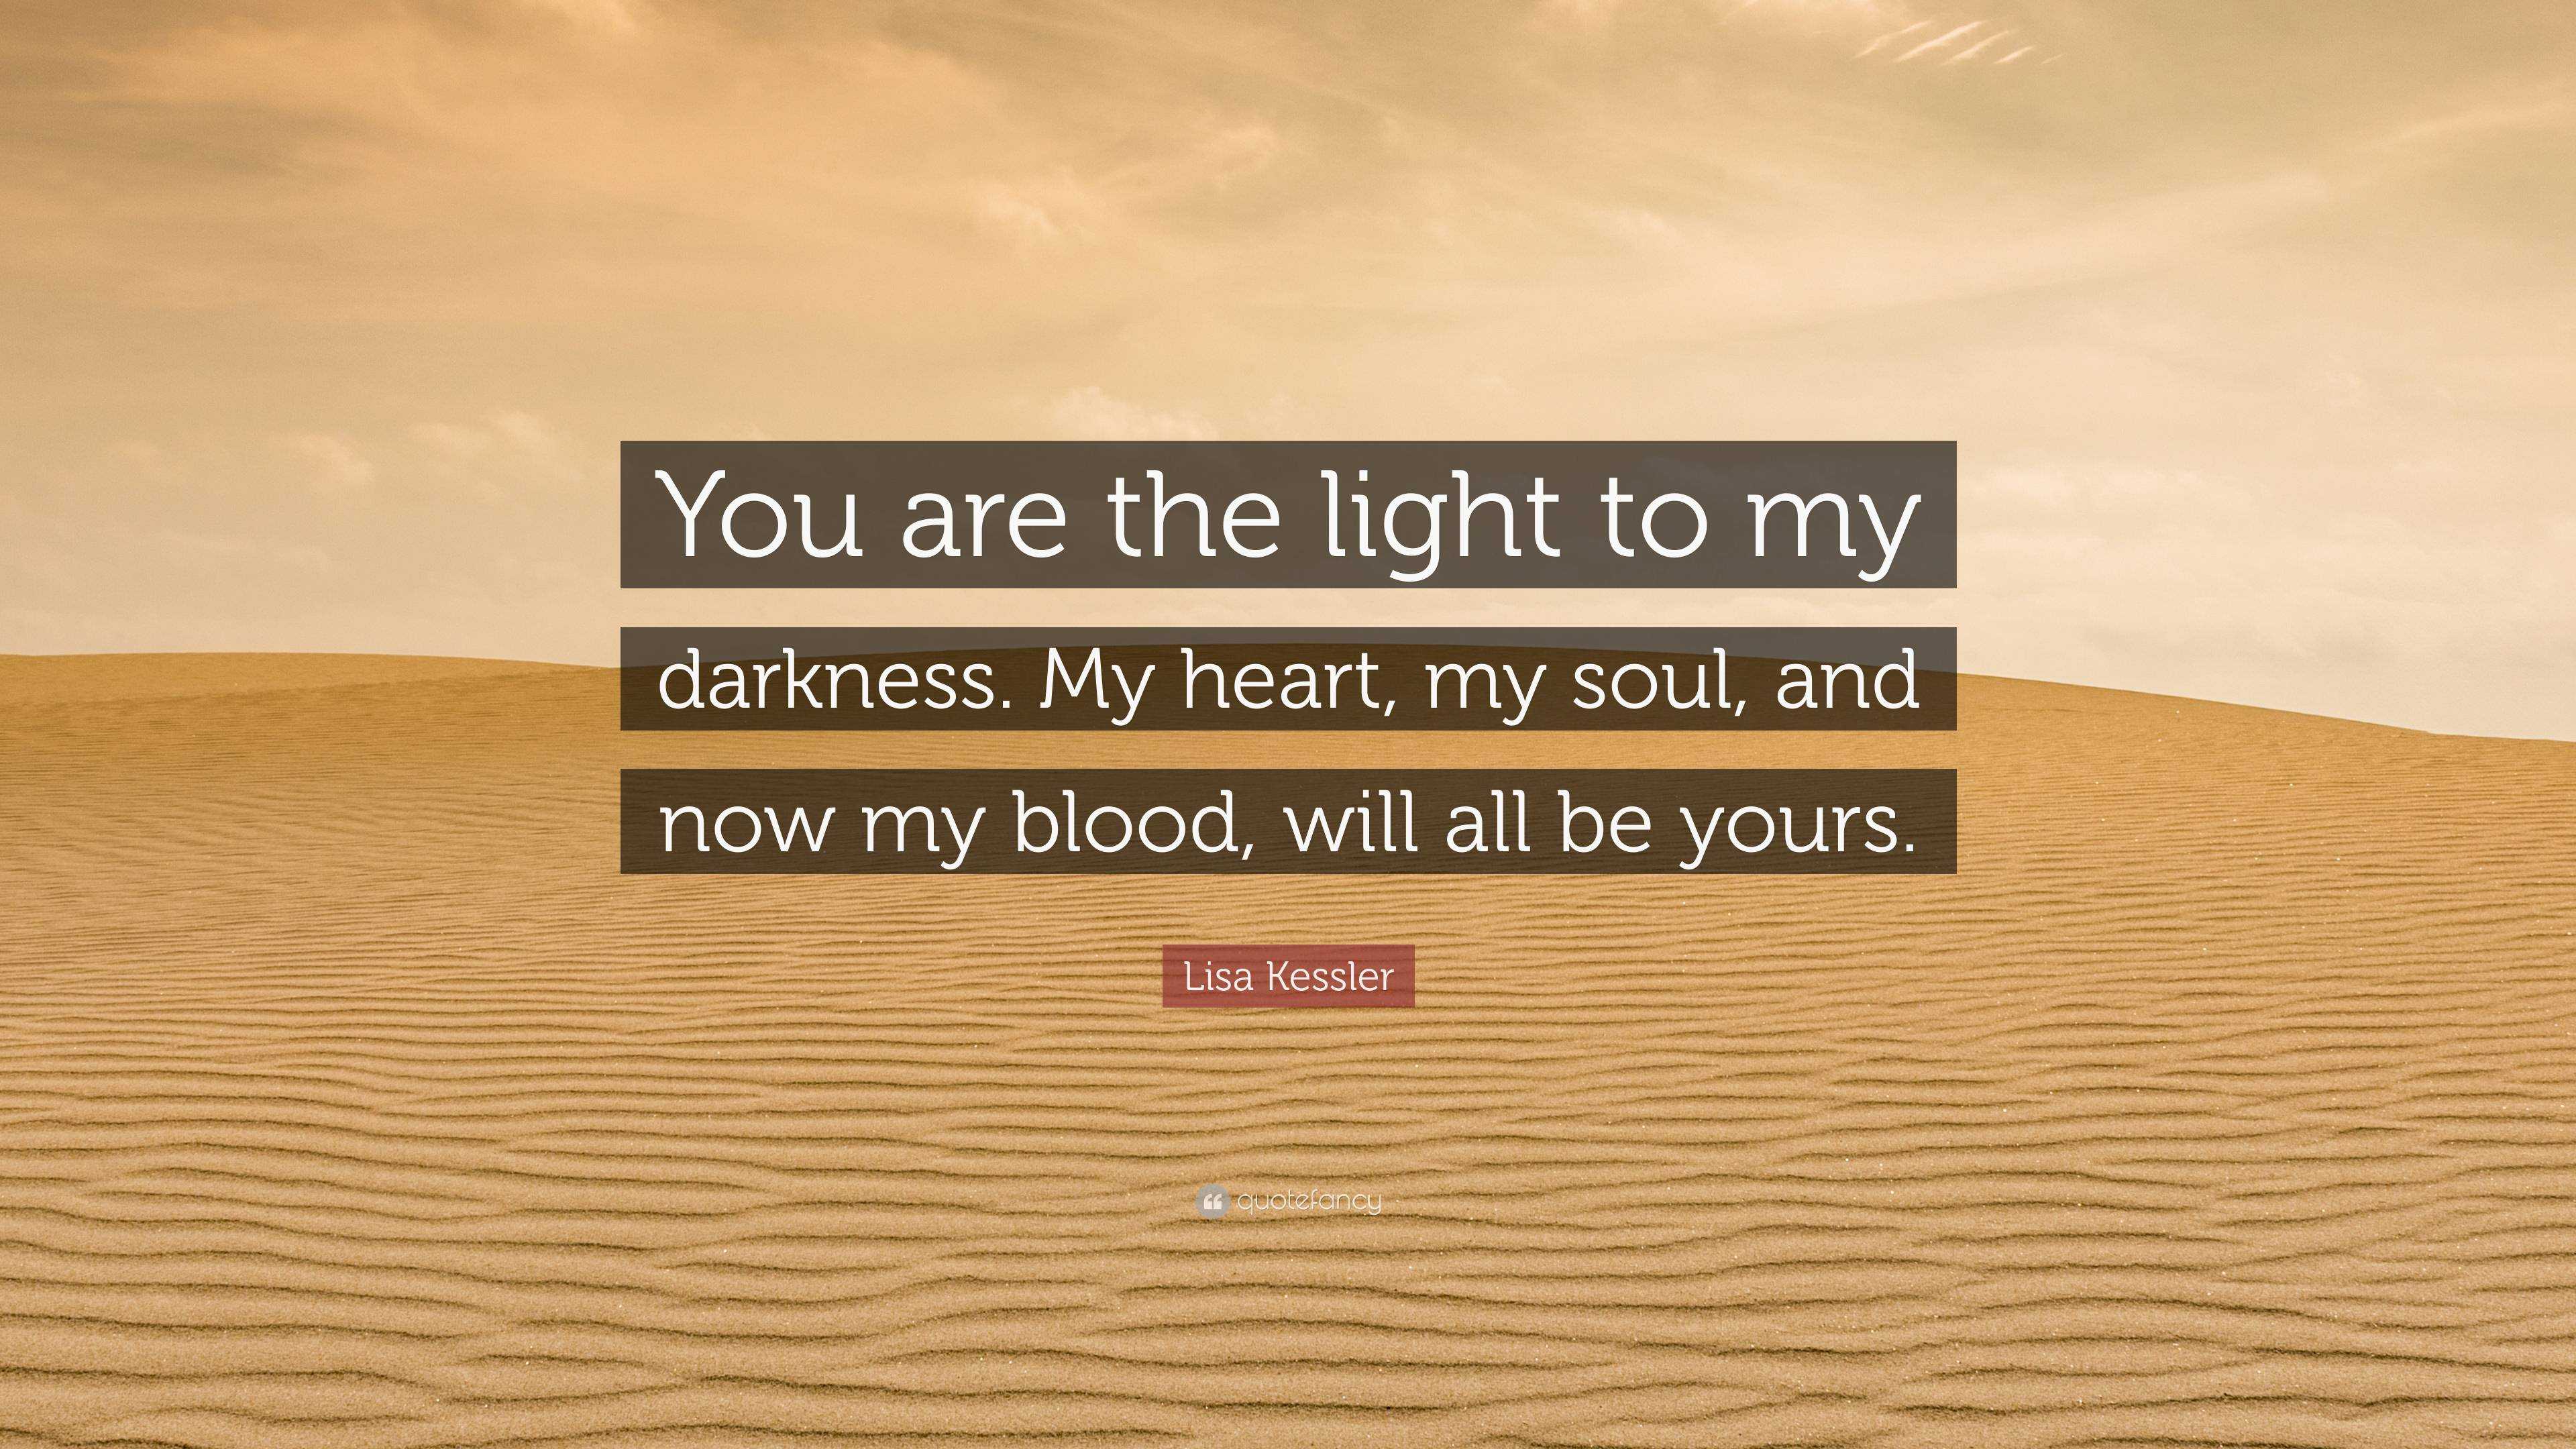 Lisa Kessler Quote: are the light to my darkness. My heart, my soul, and now